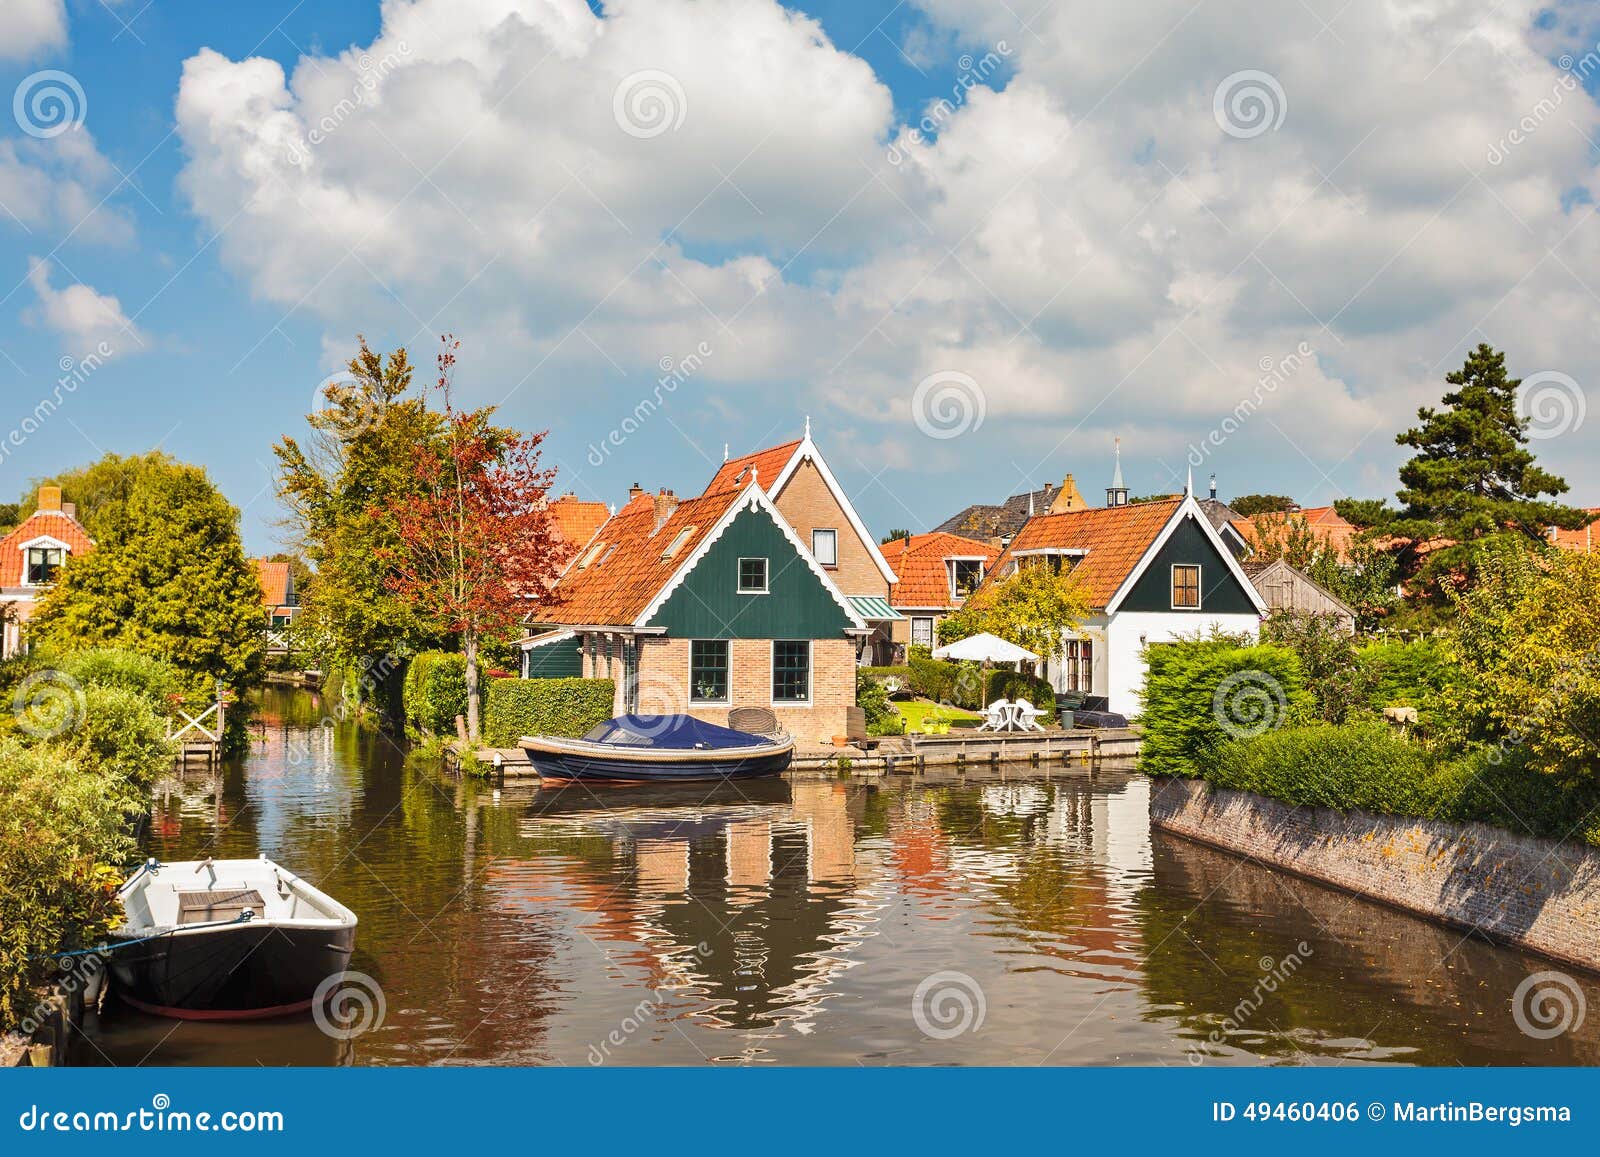 The Small Dutch Village of Hindeloopen Stock Photo - Image of home ...